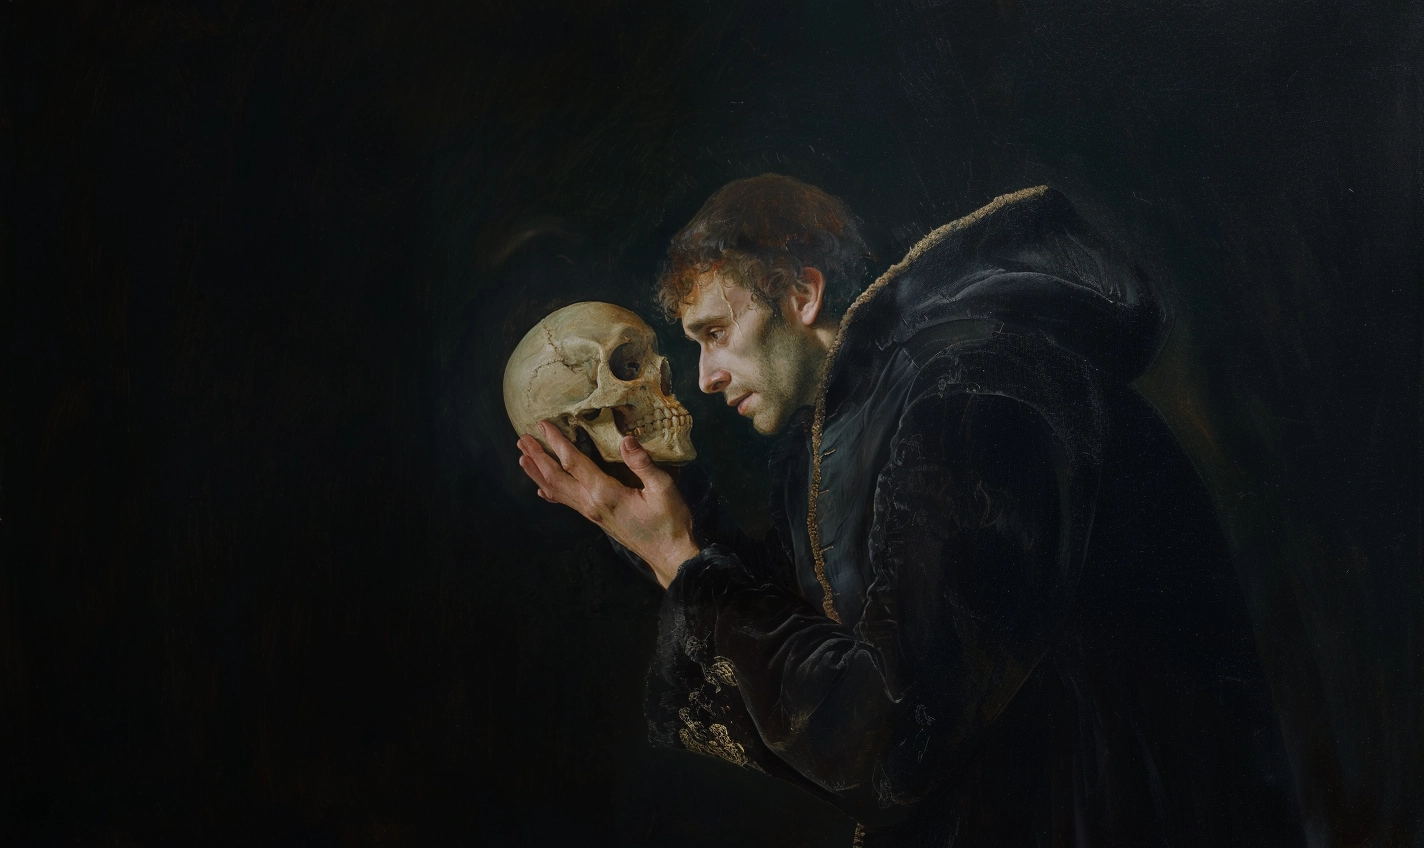 Hamlet to has a human skull in his hand and asks to be or not to be